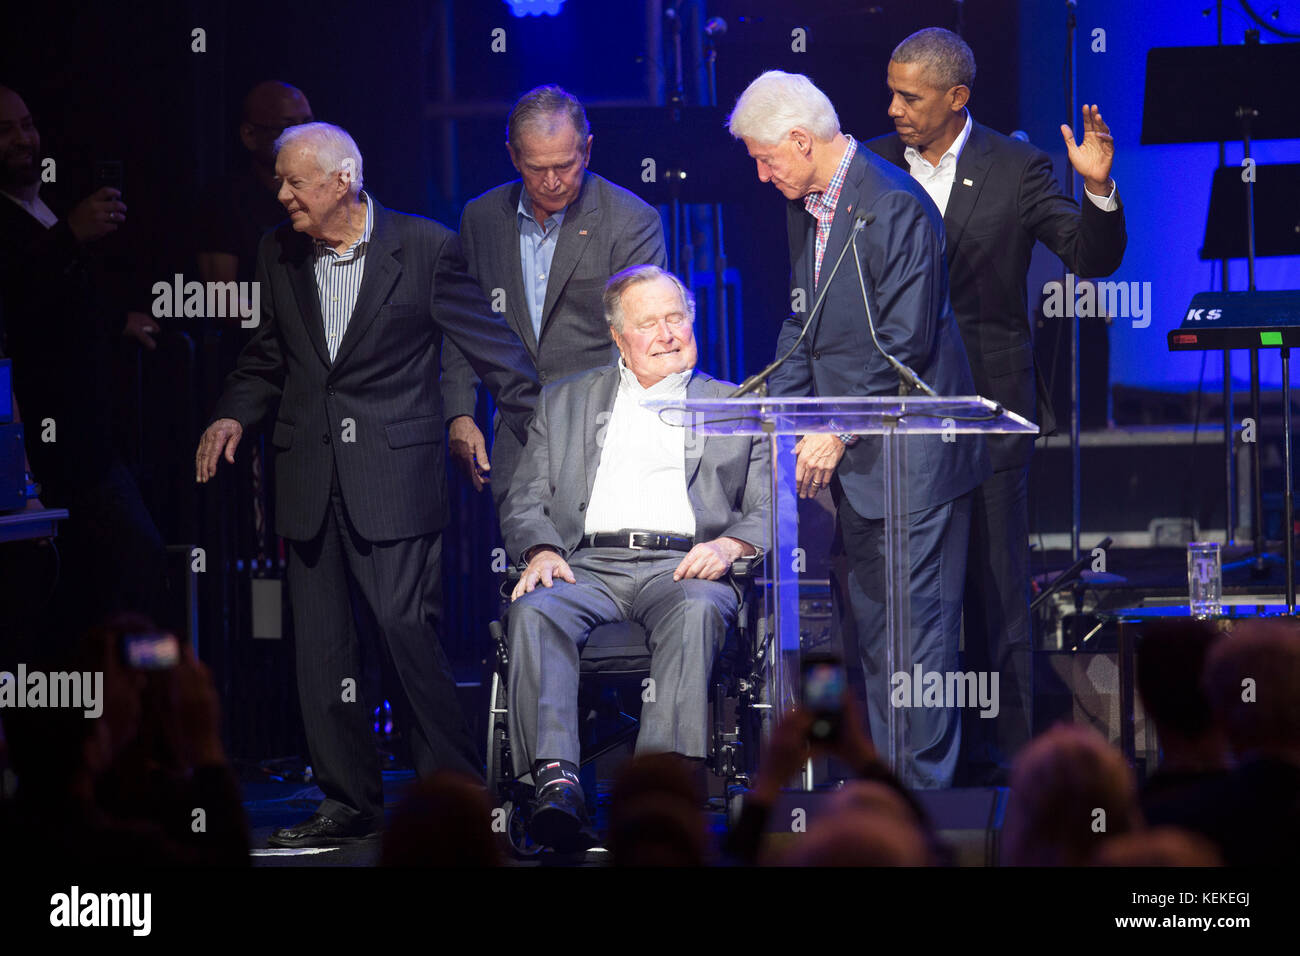 College Station, Texas USA Oct. 21, 2017: The five living former U.S. Presidents onstage at Texas A&M University's Reed Arena for a One America Appeal benefit concert and fund raiser for hurricane and storm relief. Left to right, former presidents Jimmy Carter, George W. Bush, George H.W. Bush, Bill Clinton and Barack Obama appear midway in the concert. Credit: Bob Daemmrich/Alamy Live News Stock Photo